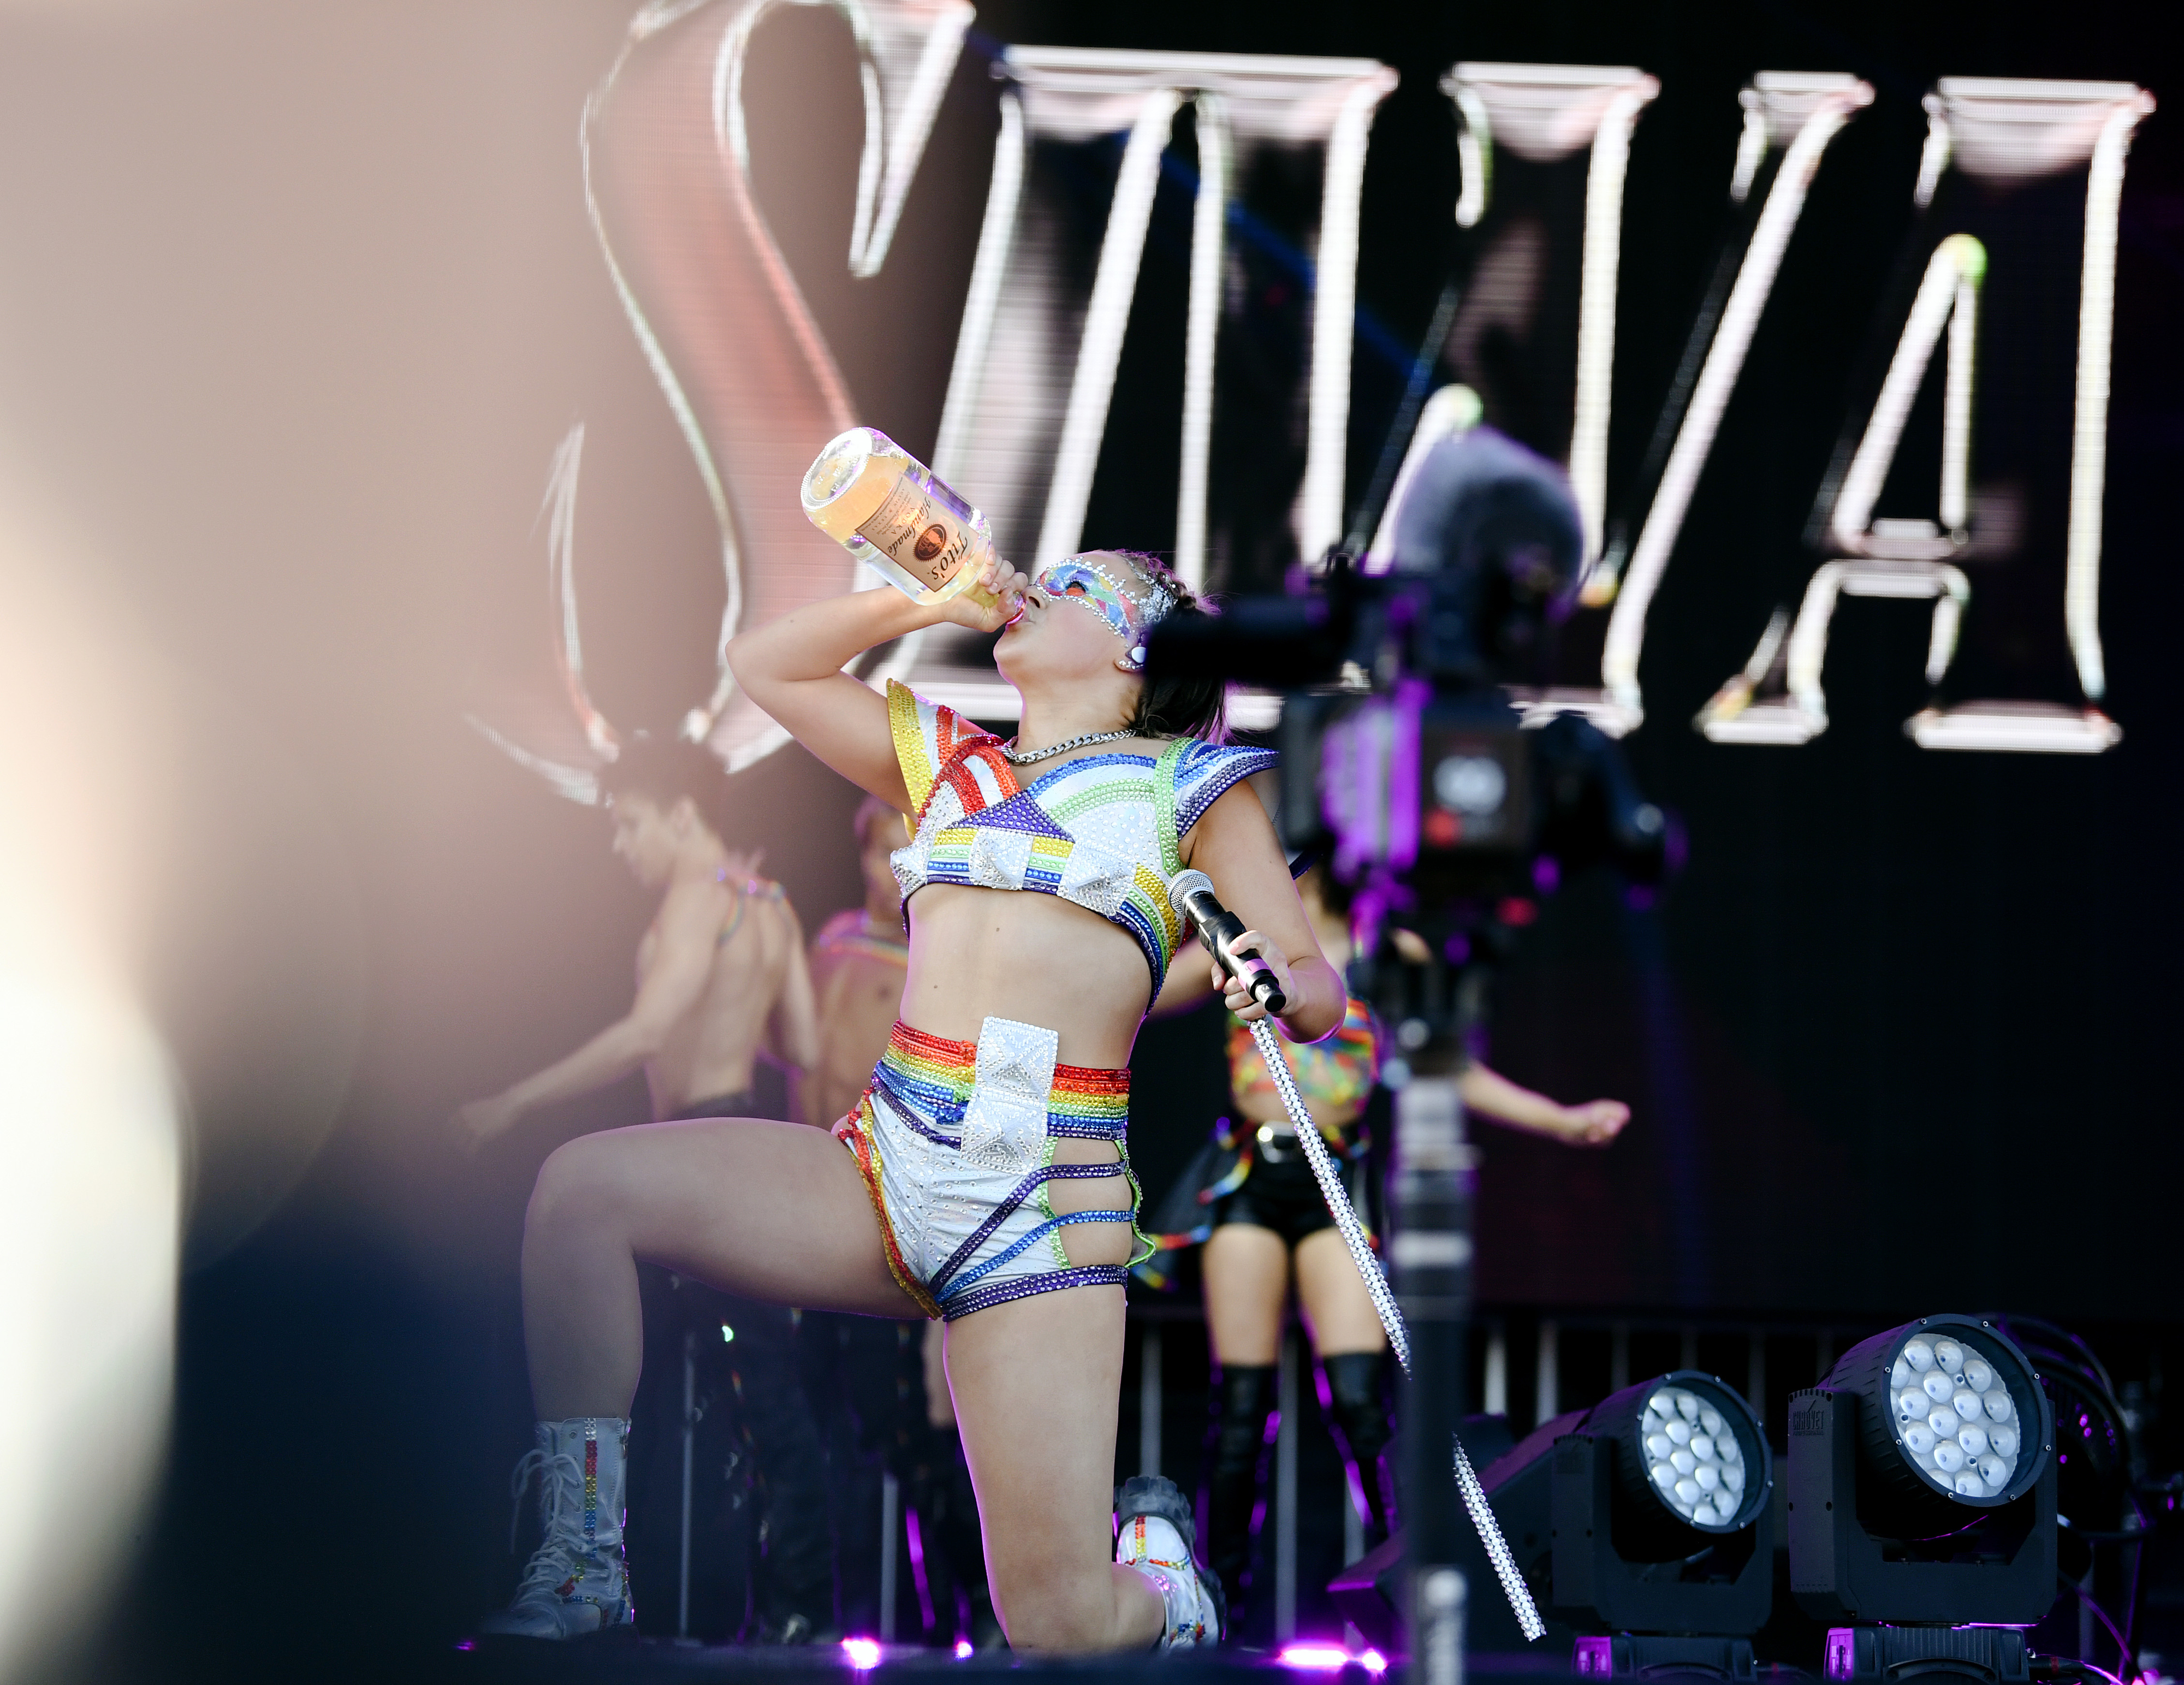 Singer JoJo Siwa performs on stage wearing a futuristic, multi-colored outfit, drinking from a large bottle, with backup dancers in the background